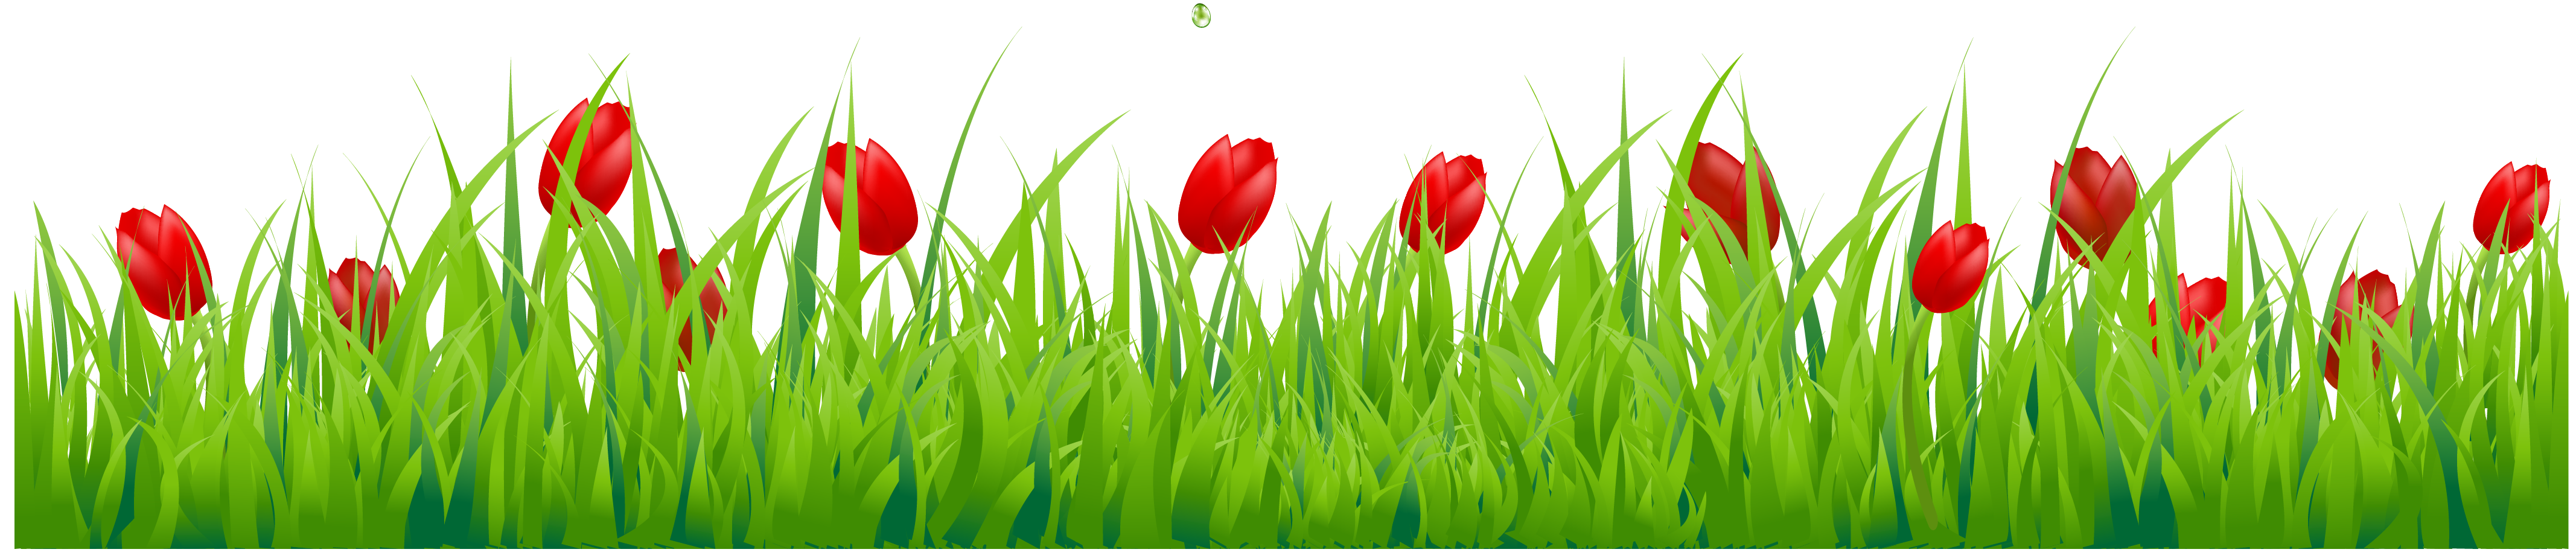 Clipart borders tulip. Grass with red tulips